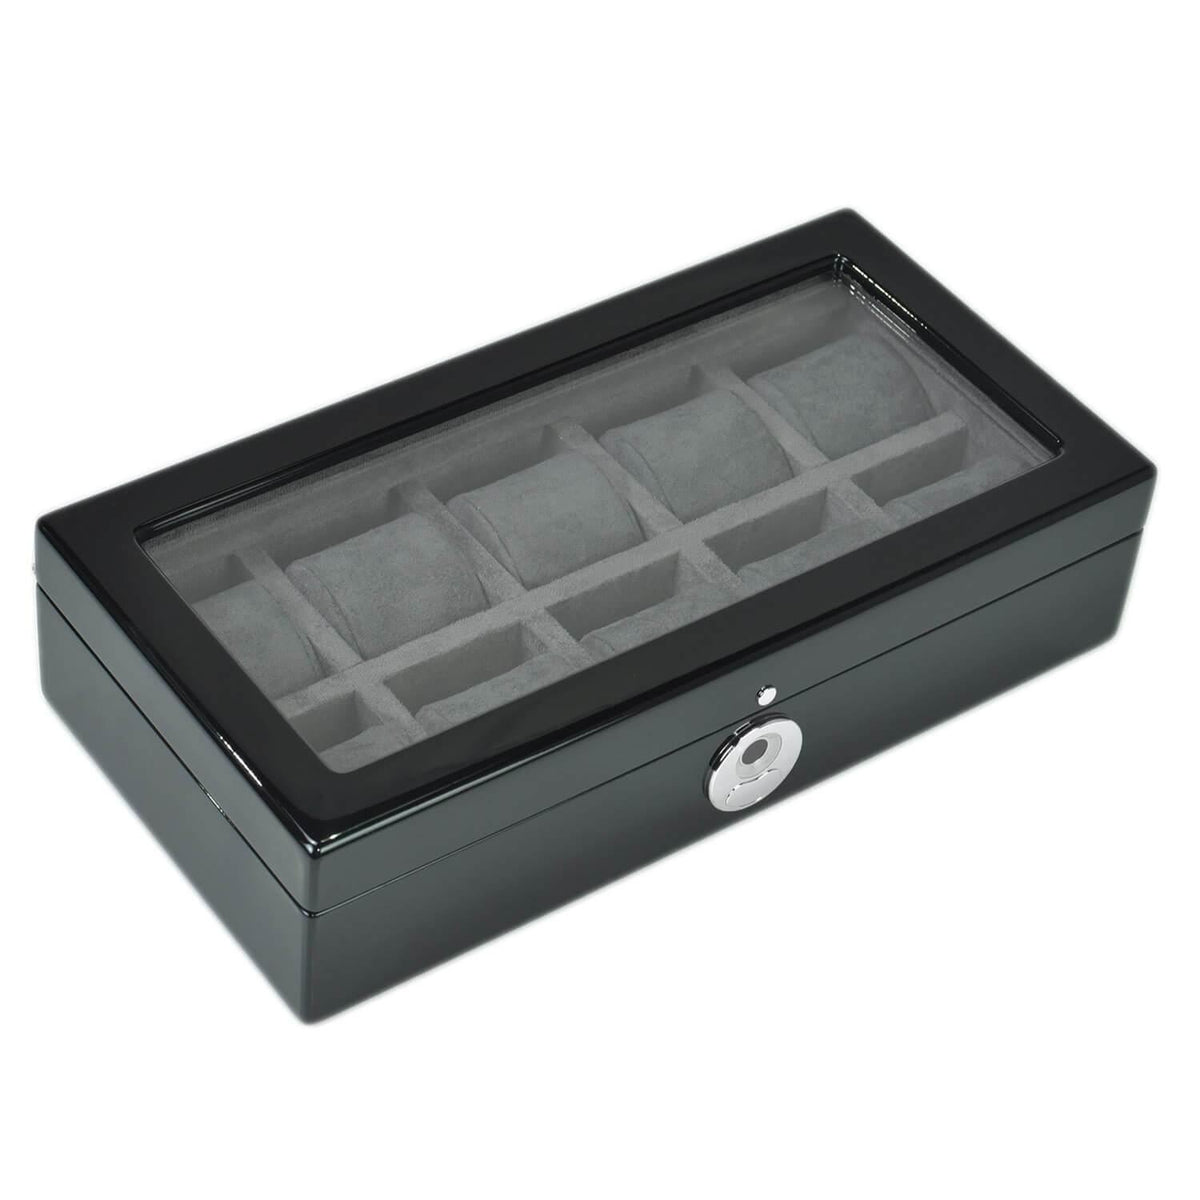 Watch Box in Black Piano Finish with BioMetric Lock Glass Lid for 10 Watches